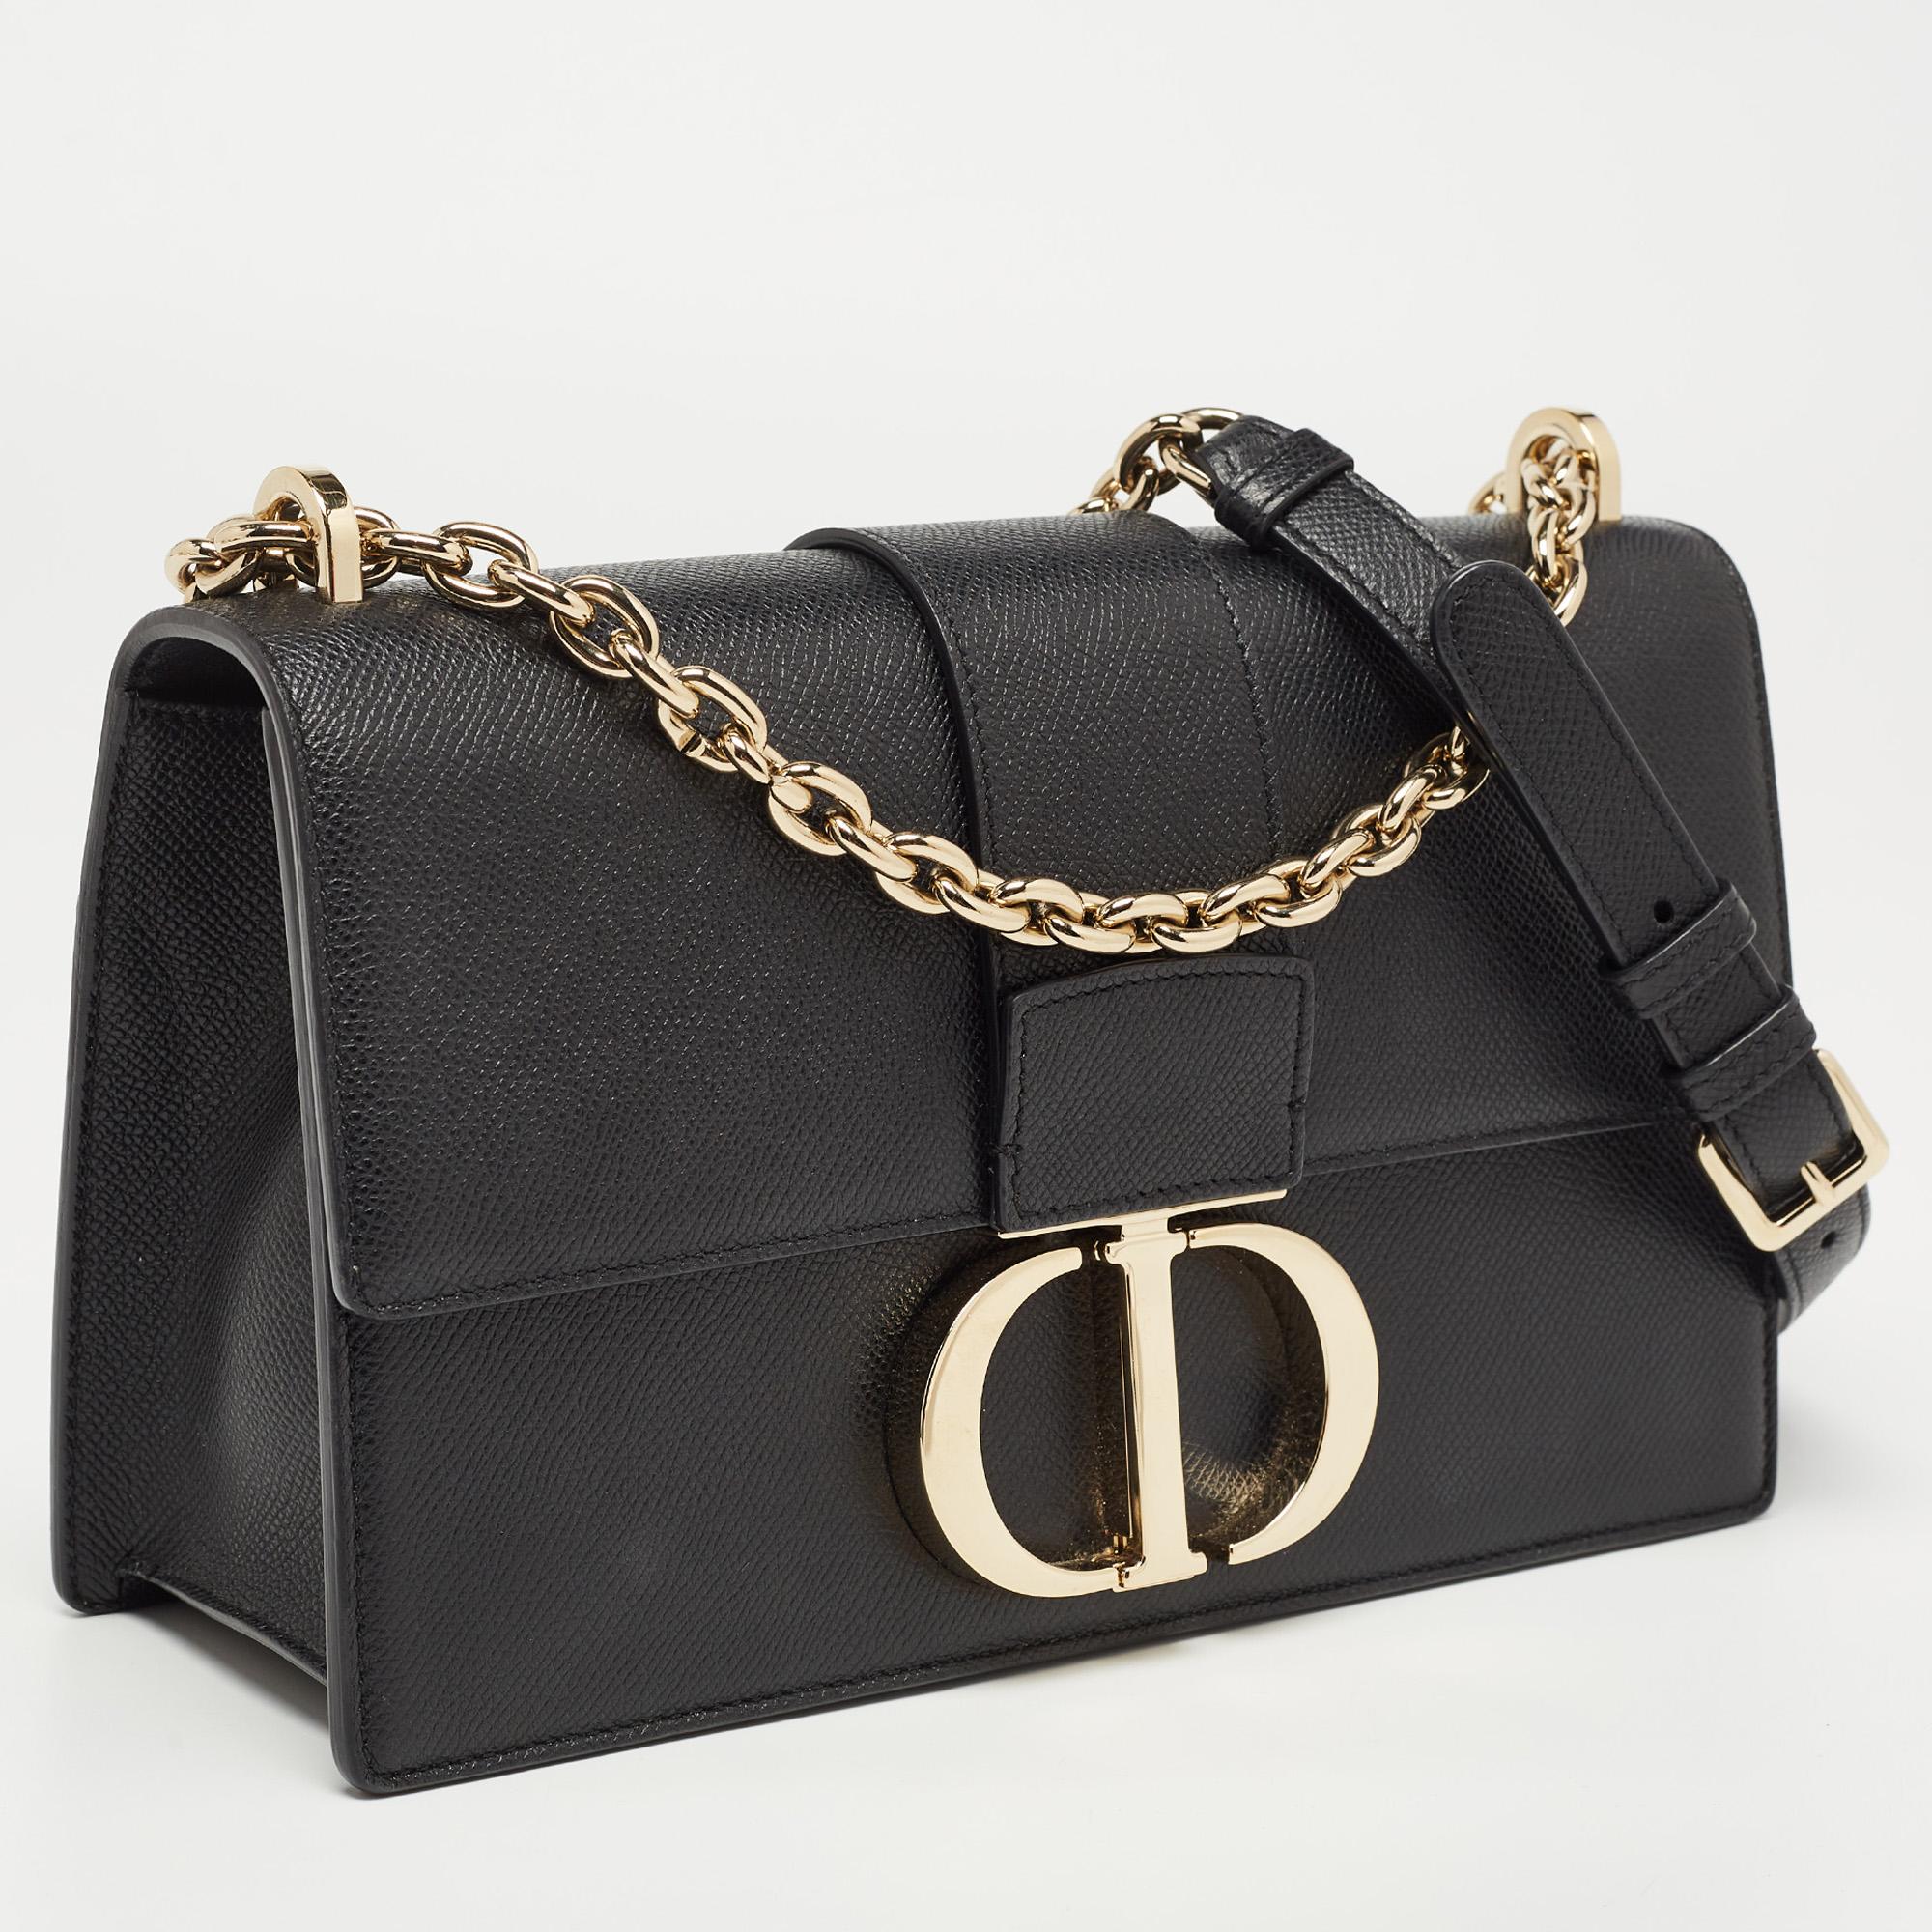 Elevate your style and have your essentials with you as you carry this authentic Dior bag. Crafted using leather, the bag has a sliding chain handle, the CD logo on the front, and a lined interior.

Includes: Original Dustbag, Authenticity Card,